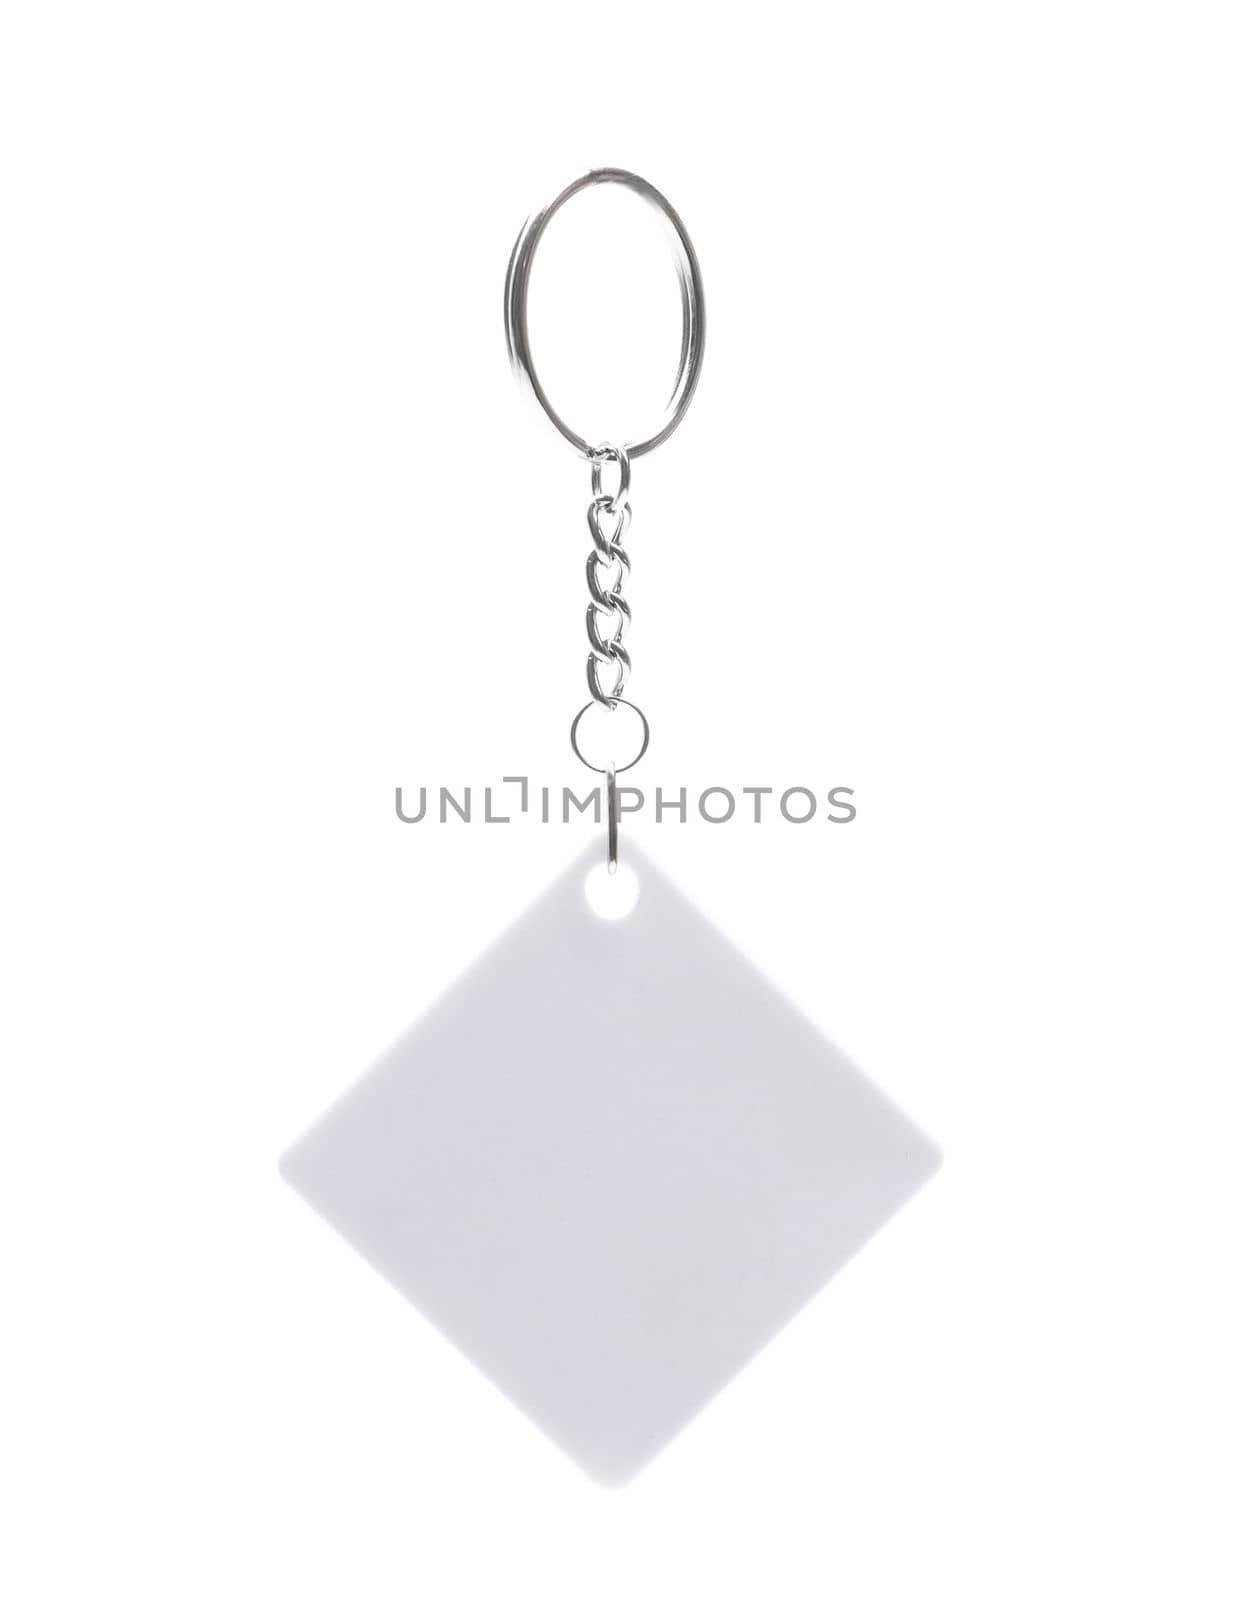 White square key holder with ring by GekaSkr